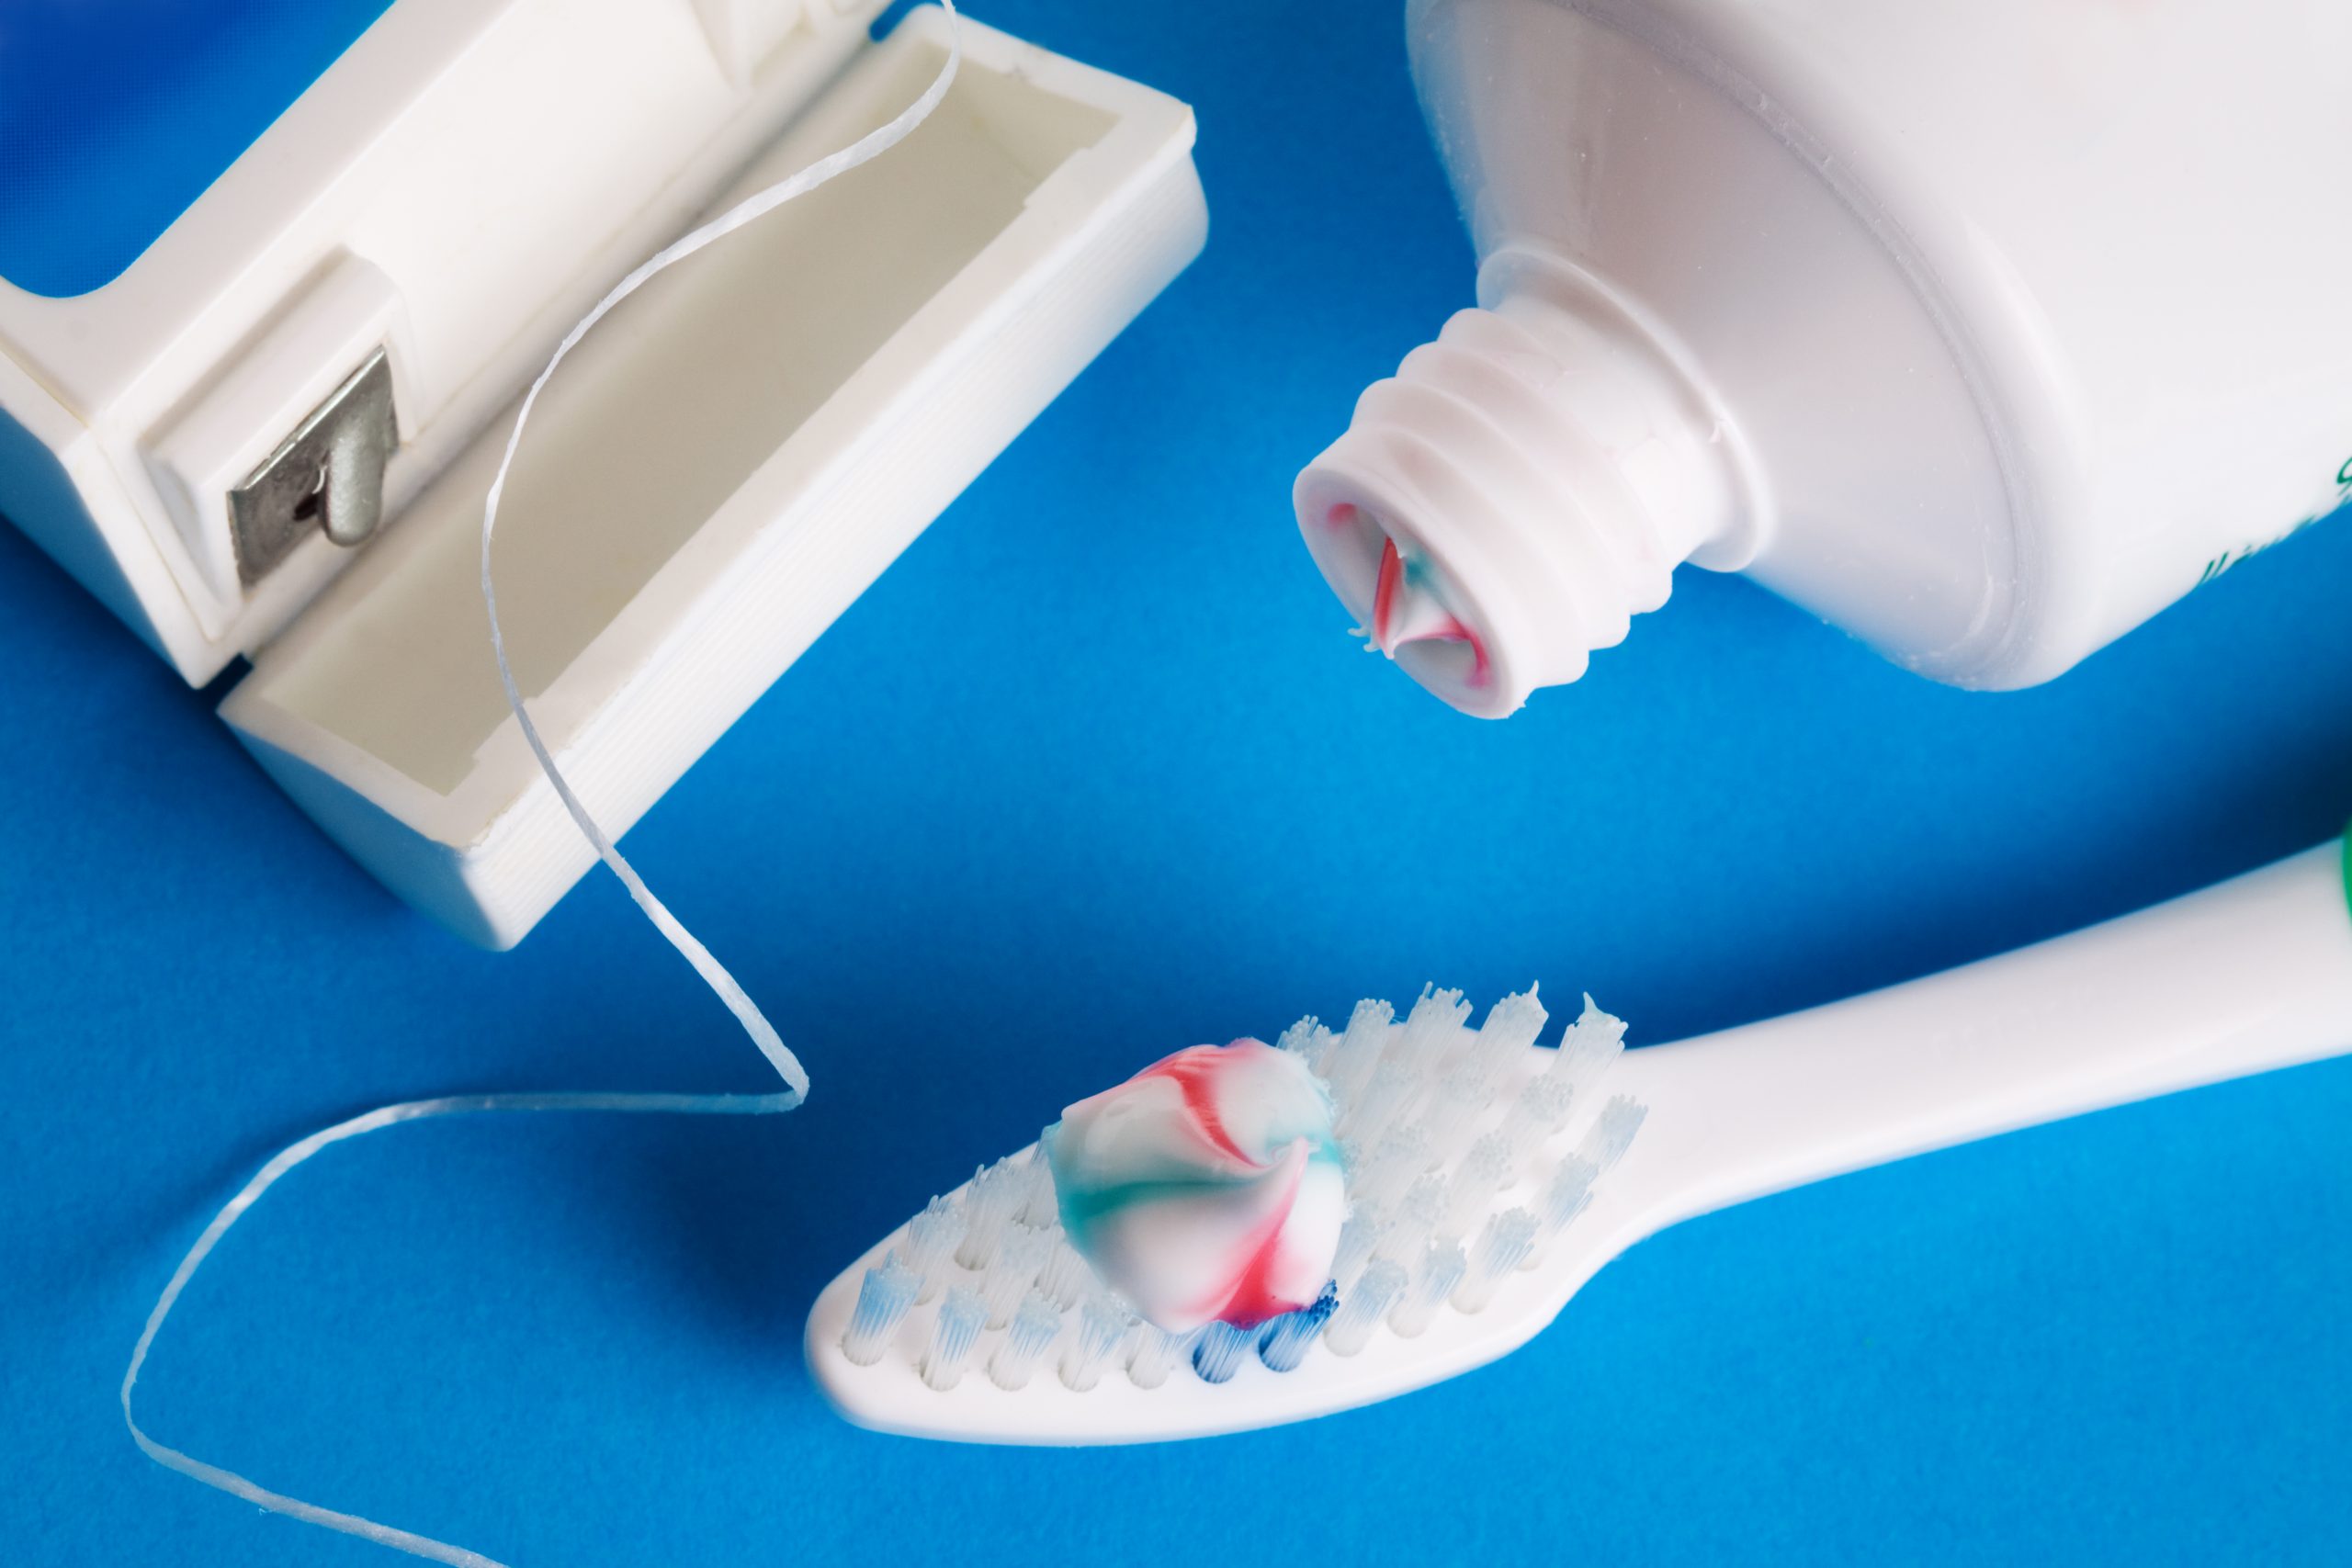 Dental floss, a toothbrush with striped toothpaste, and a toothpaste tube illustrate the need for great oral health.